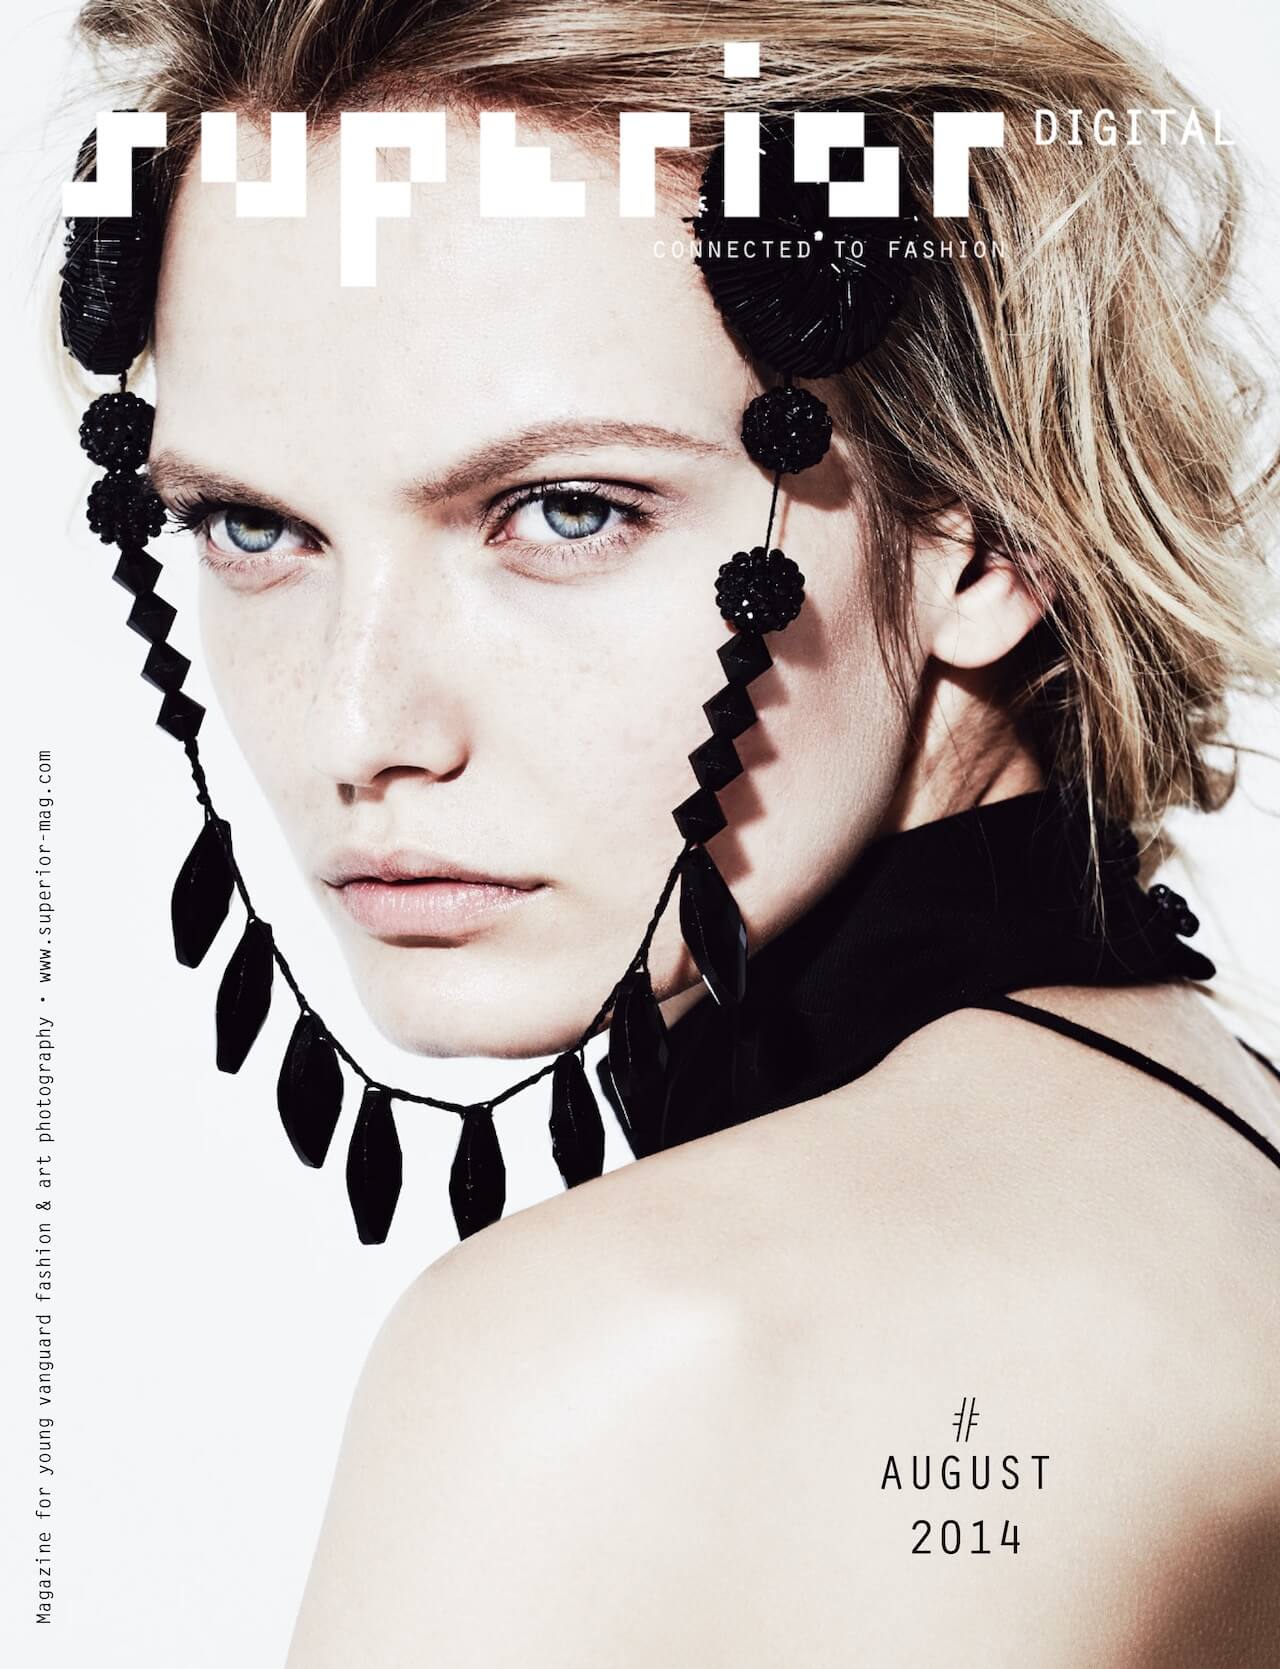 Superior Magazine # 34 | The August 2014 digital-print issue is out now